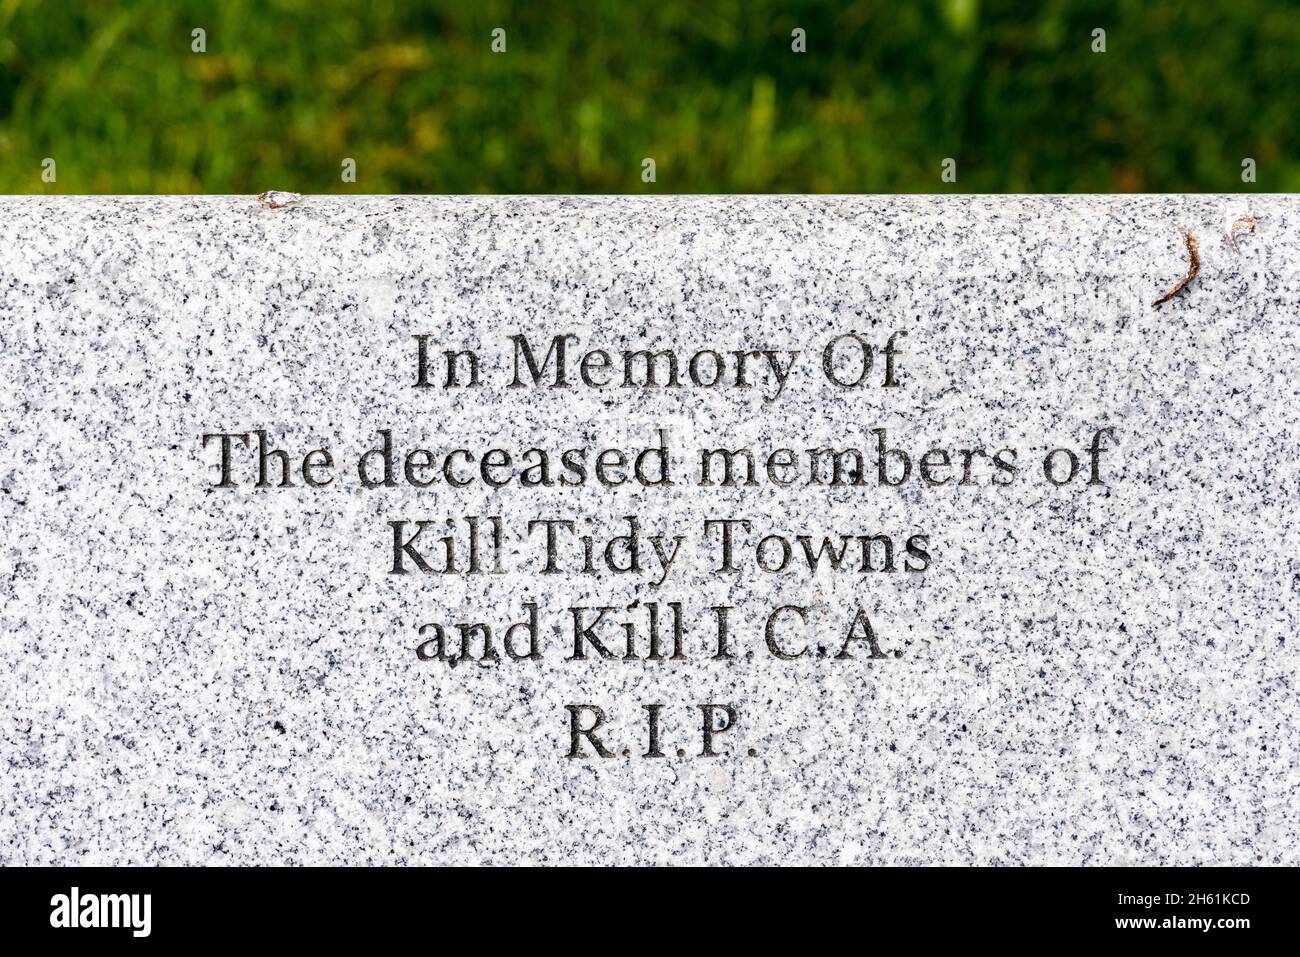 Engraving on a stone bench, In memory of the deceased members of Kill tidy towns and Kill ICA RIP, in Kill, County Kildare, Ireland, Stock Photo